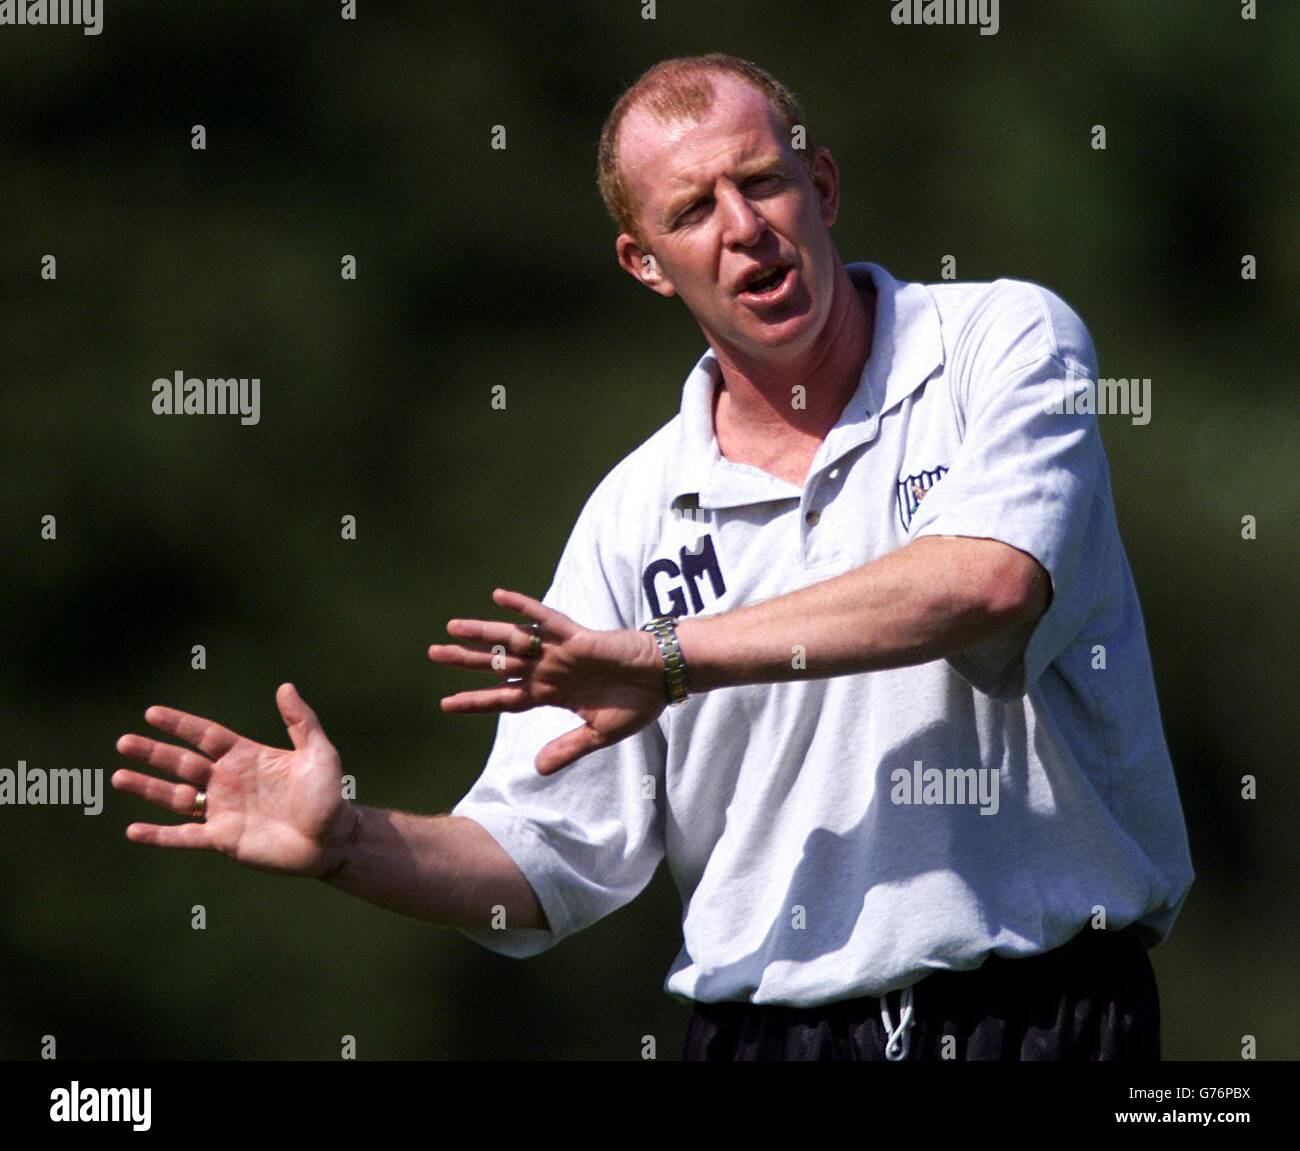 West Bromwich Albion Manager Gary Megson watches his players in training prior to their opening game in the Premiership against Manchester United on Saturday at Old Trafford, Aston University Sports Ground, Birmingham. Stock Photo